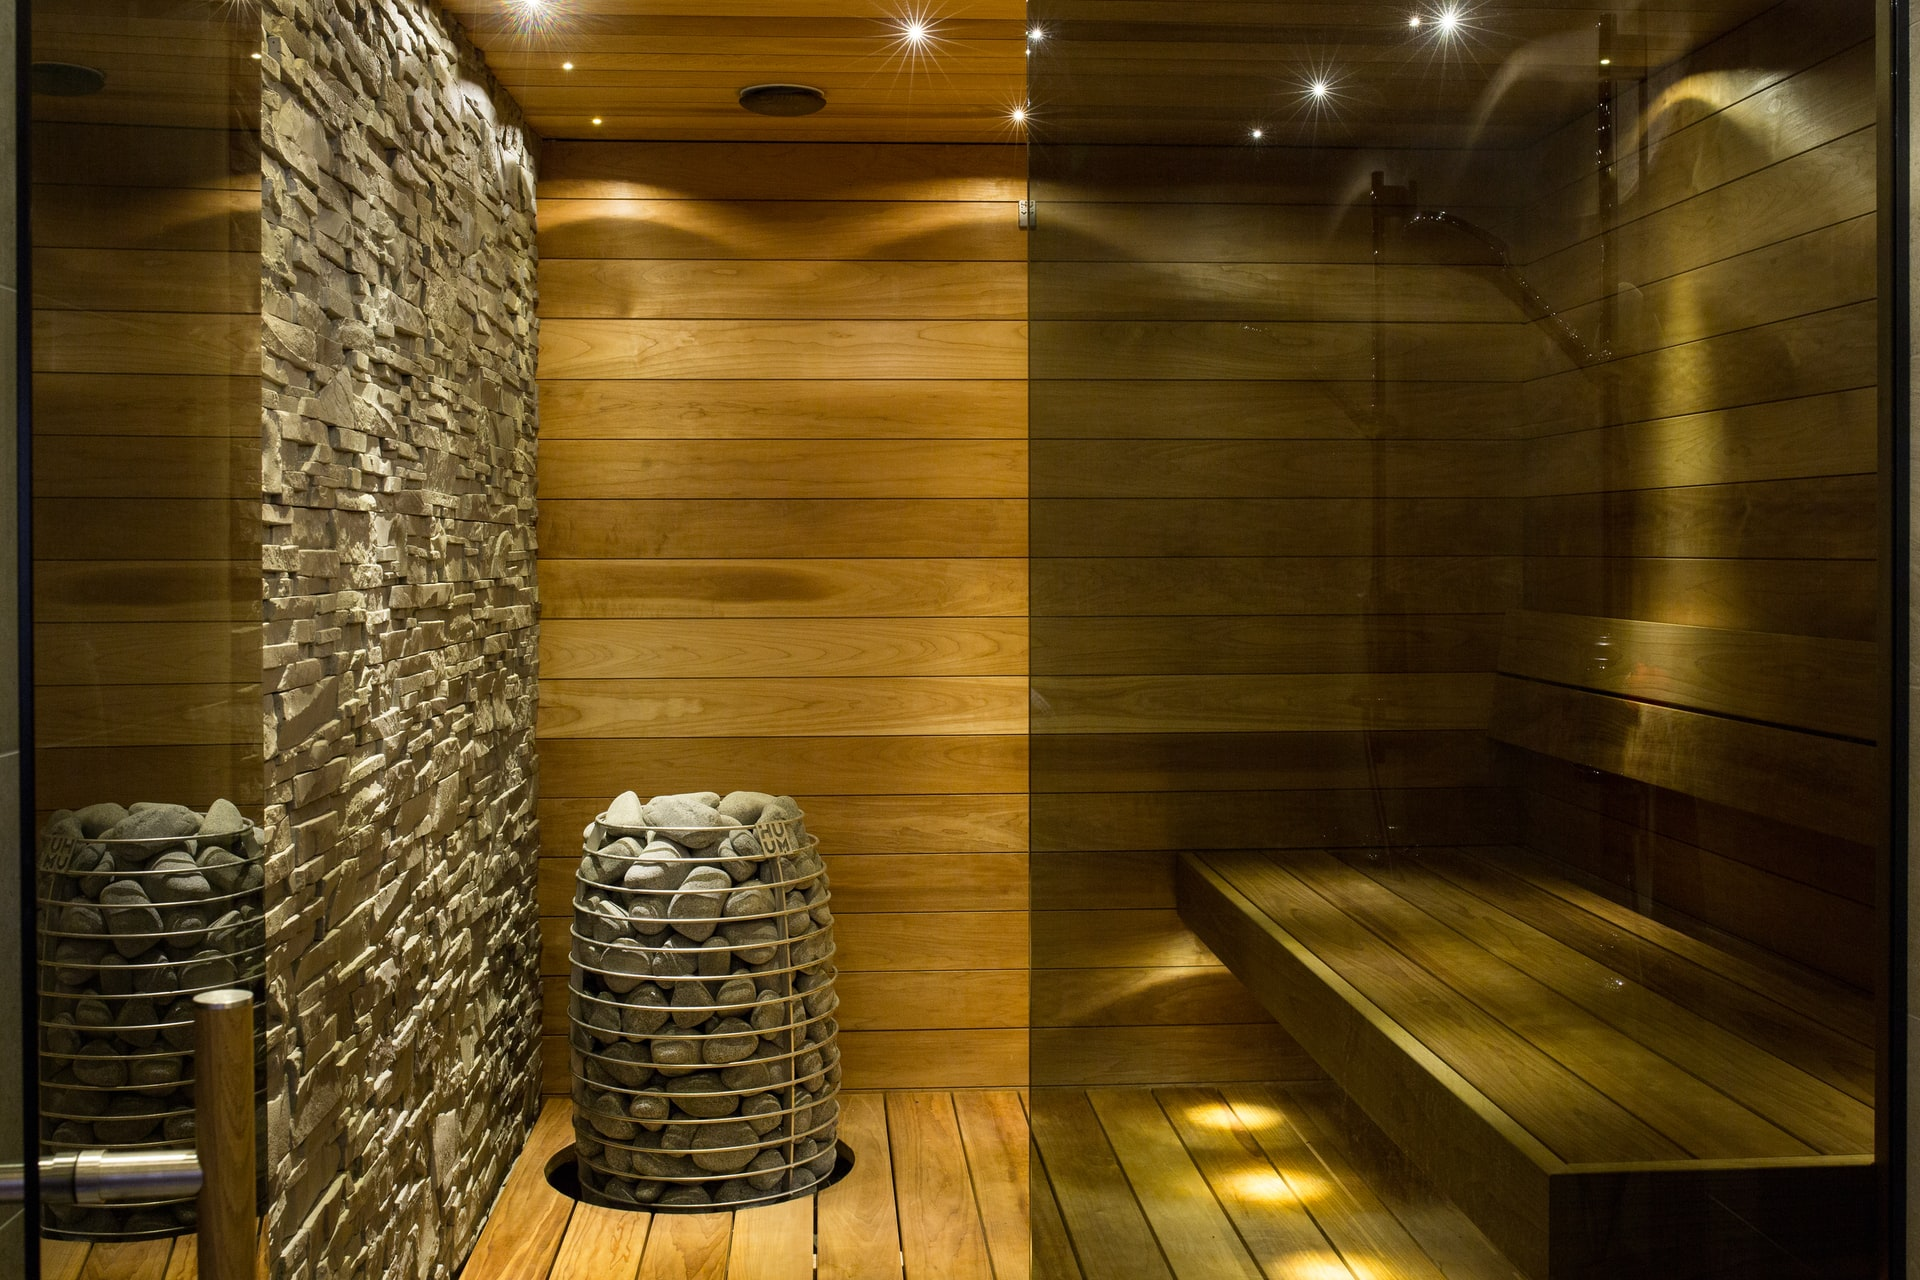 A sauna room with wooden walls and a stone bench that requires maintenance.